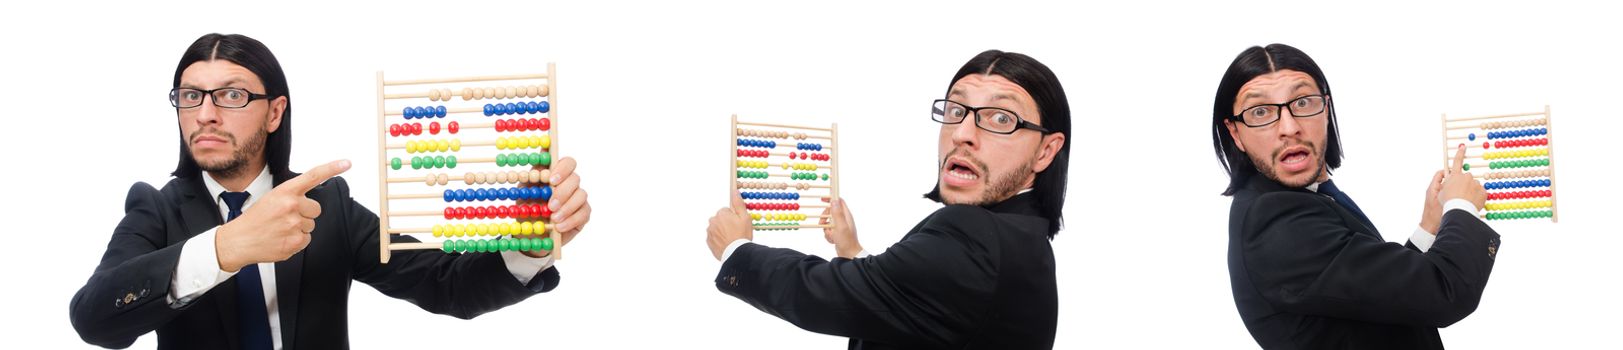 Funny man with calculator and abacus